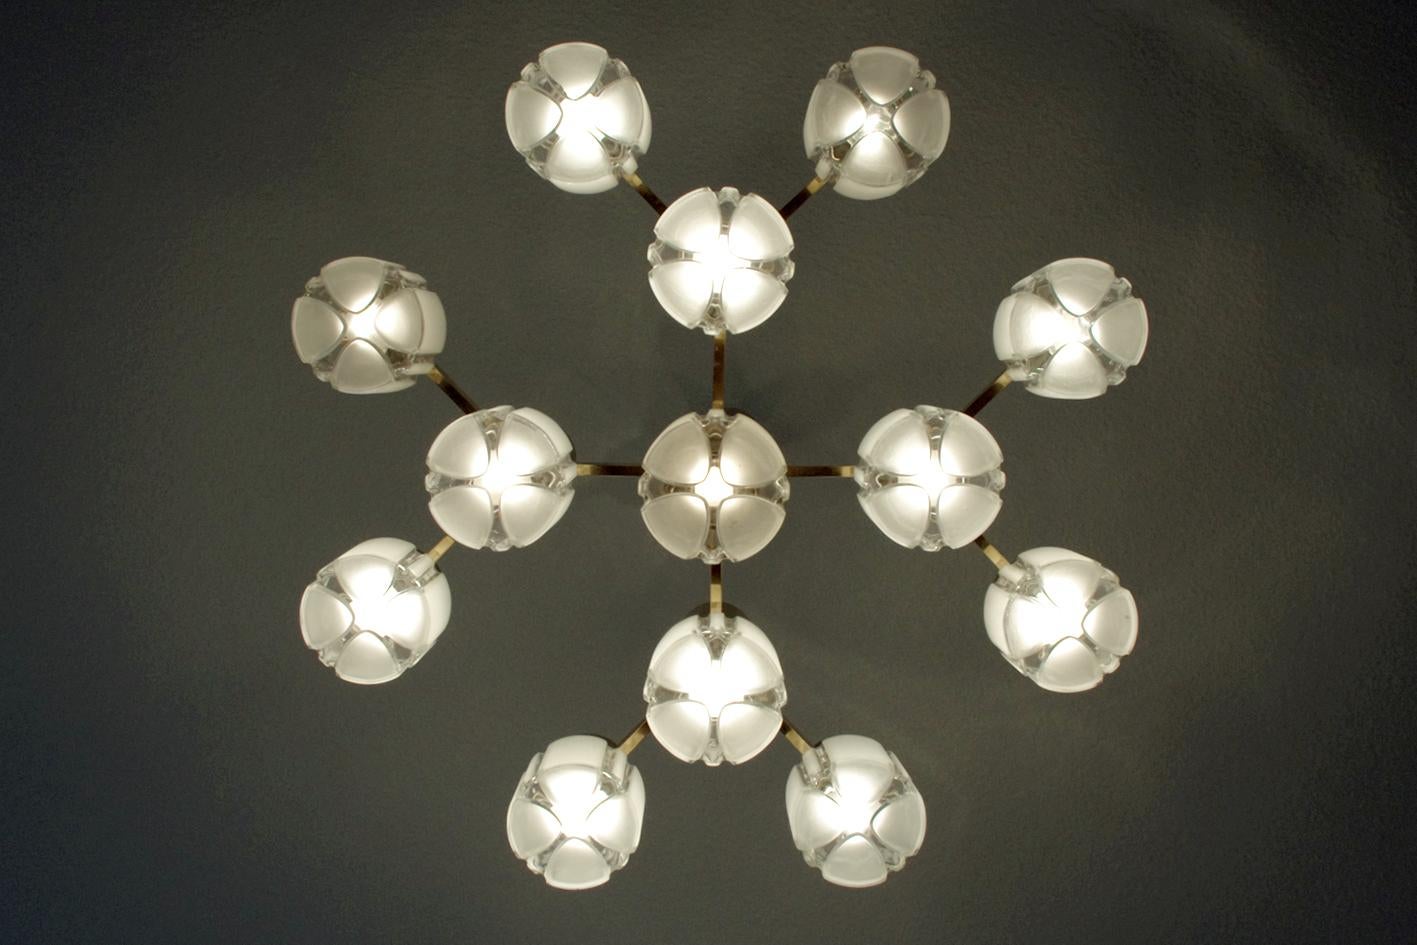 Spectacular vintage Sputnik chandelier (pendant or flush mount) with thirteen clear and matt glass shadows.
Germany, 1960s.
Measures: Diameter: 31.5 in, Height (body): 13.8 in.
Rod can be replaced as required for different height.
Lamp sockets: 13 x